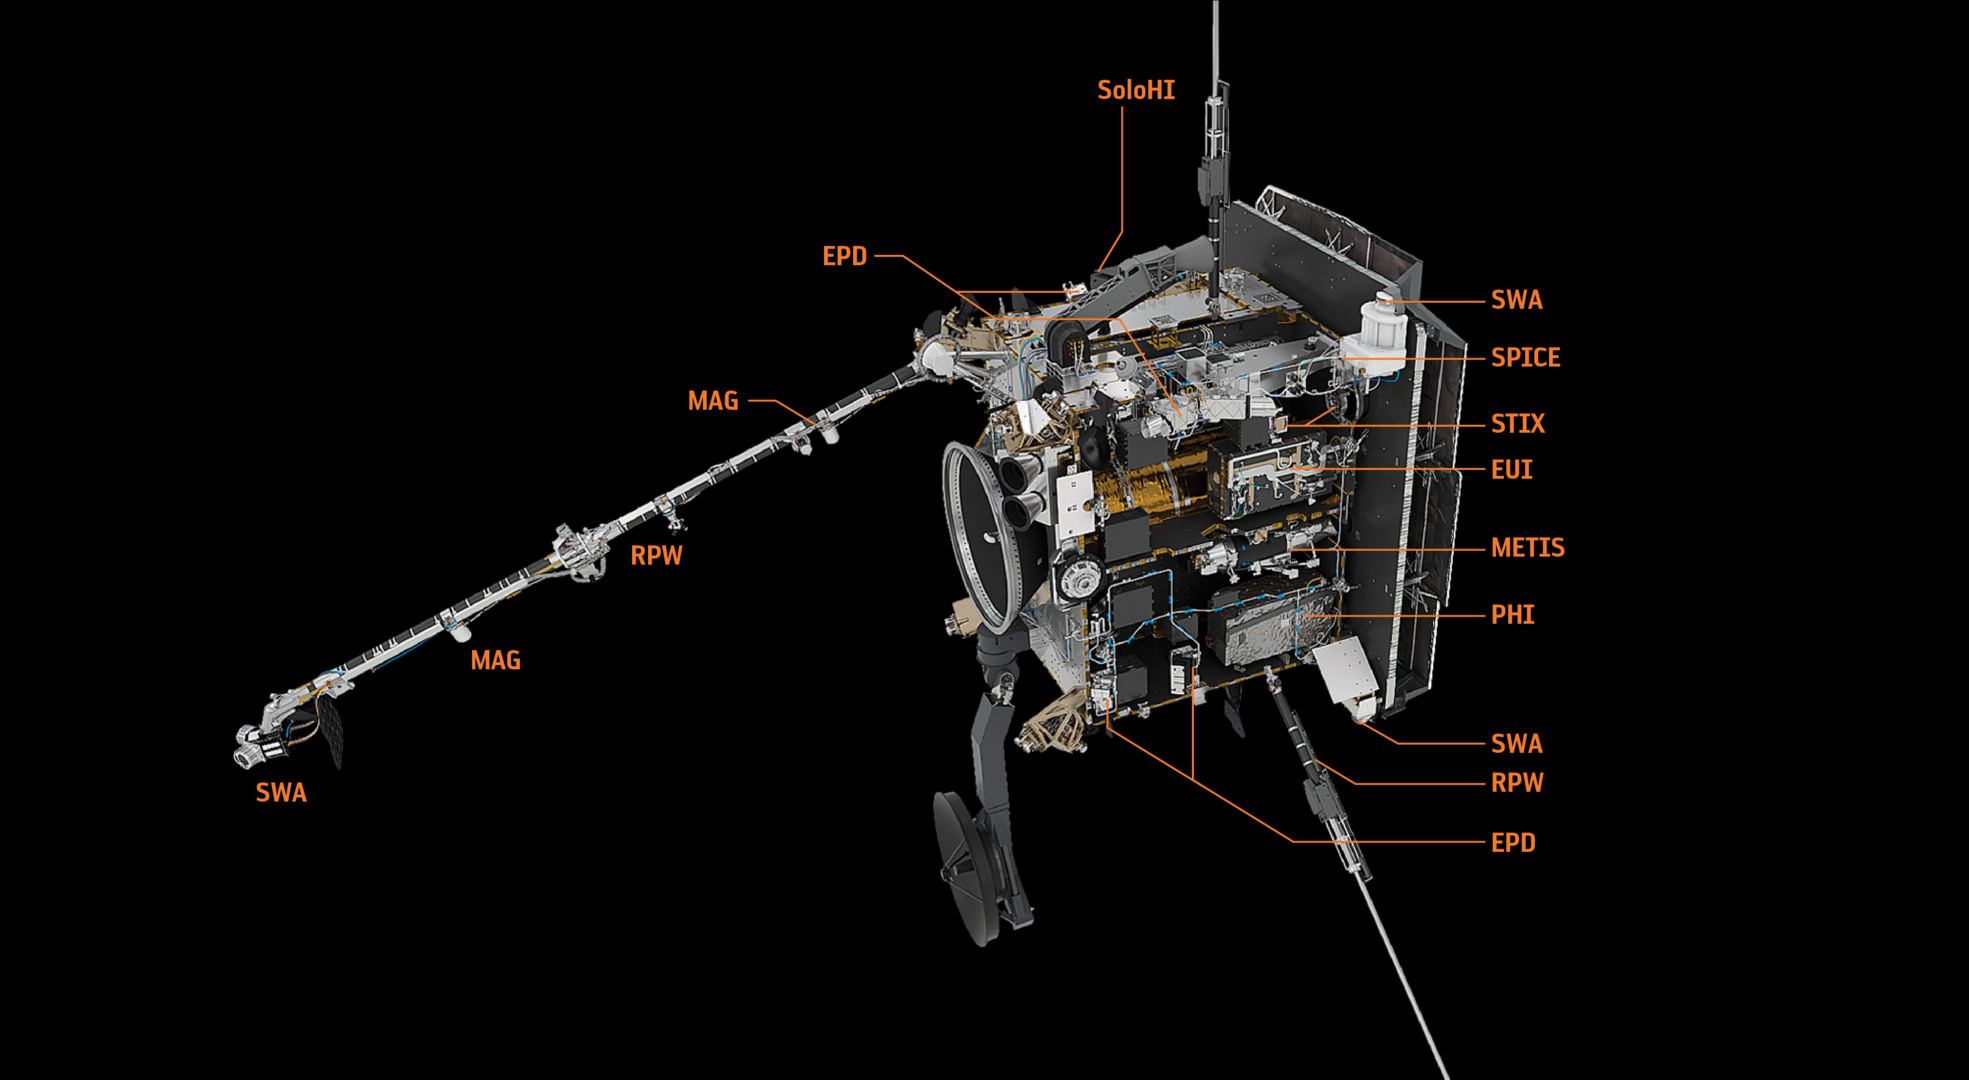 Solar Orbiter carries ten instruments, some of which consist of multiple instrument packages. Three of the spacecraft's four 'in situ' instruments, which measure the environment in the vicinity of the spacecraft, are located on Solar Orbiter's 4.4 m boom.